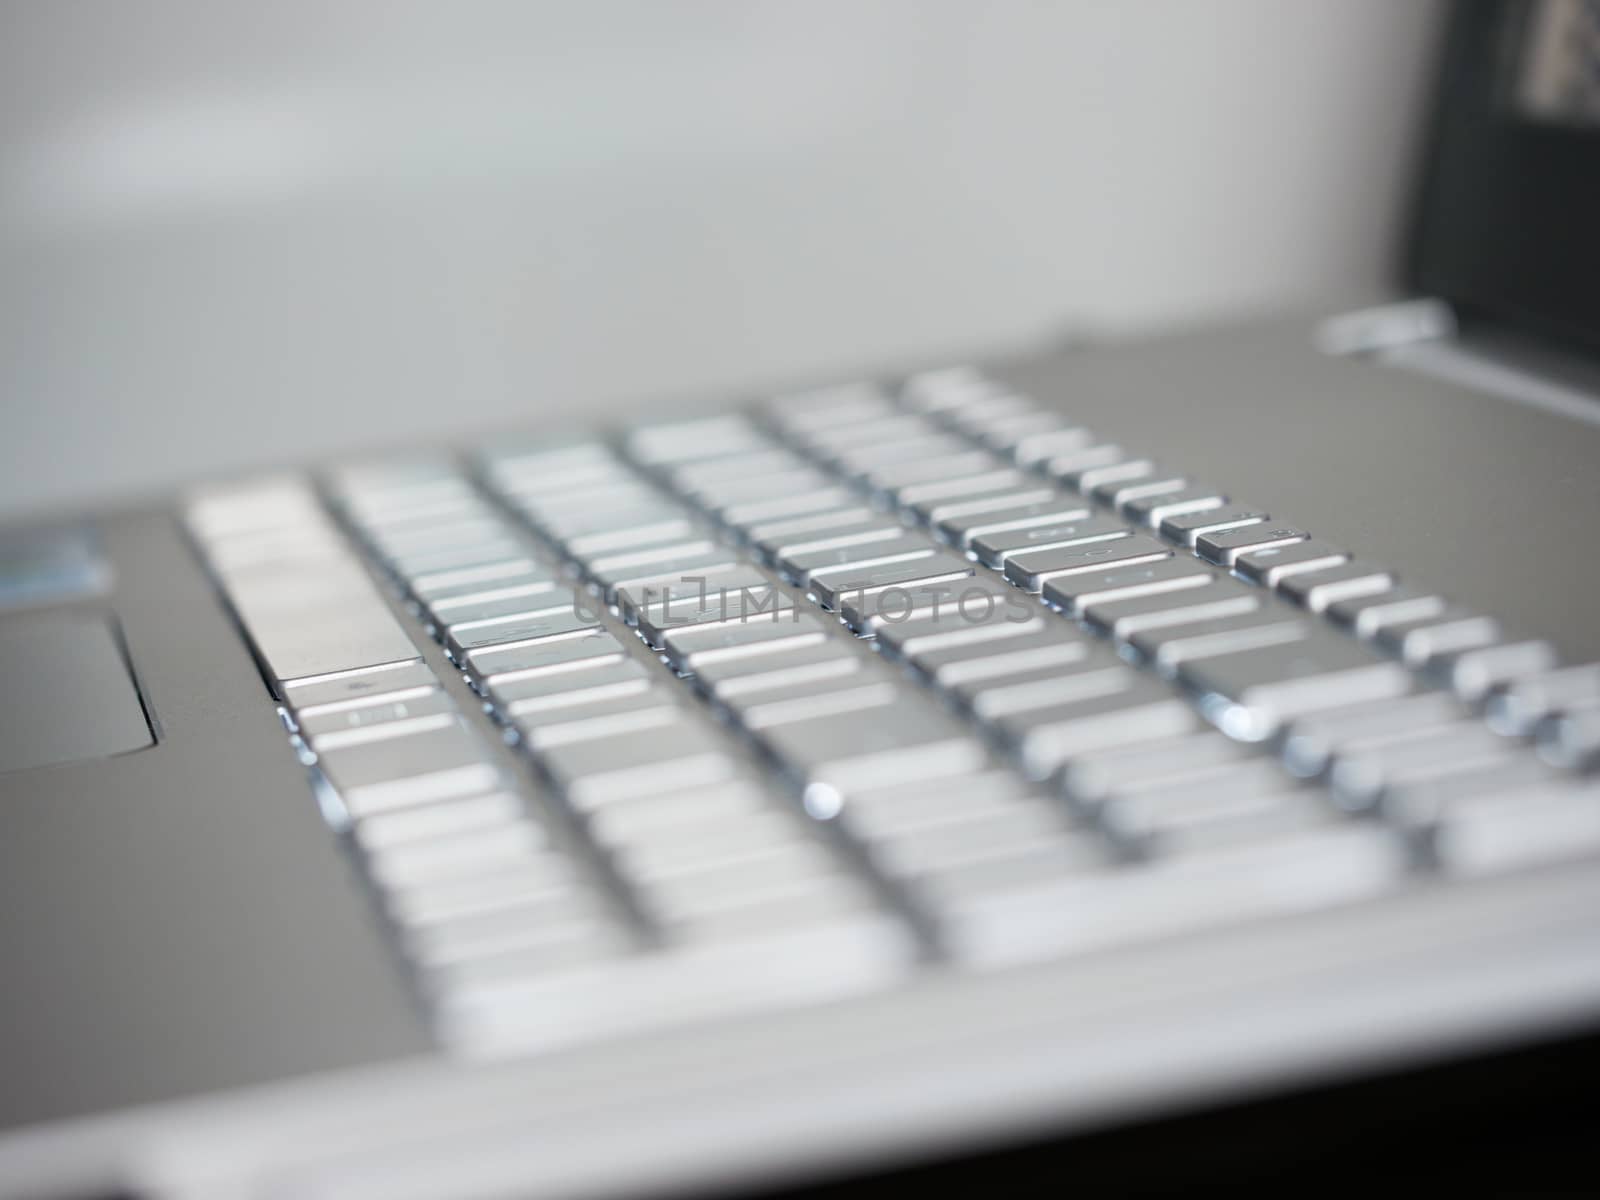 Abstract close-up silver laptop keyboard with copy space. Shallow DOF